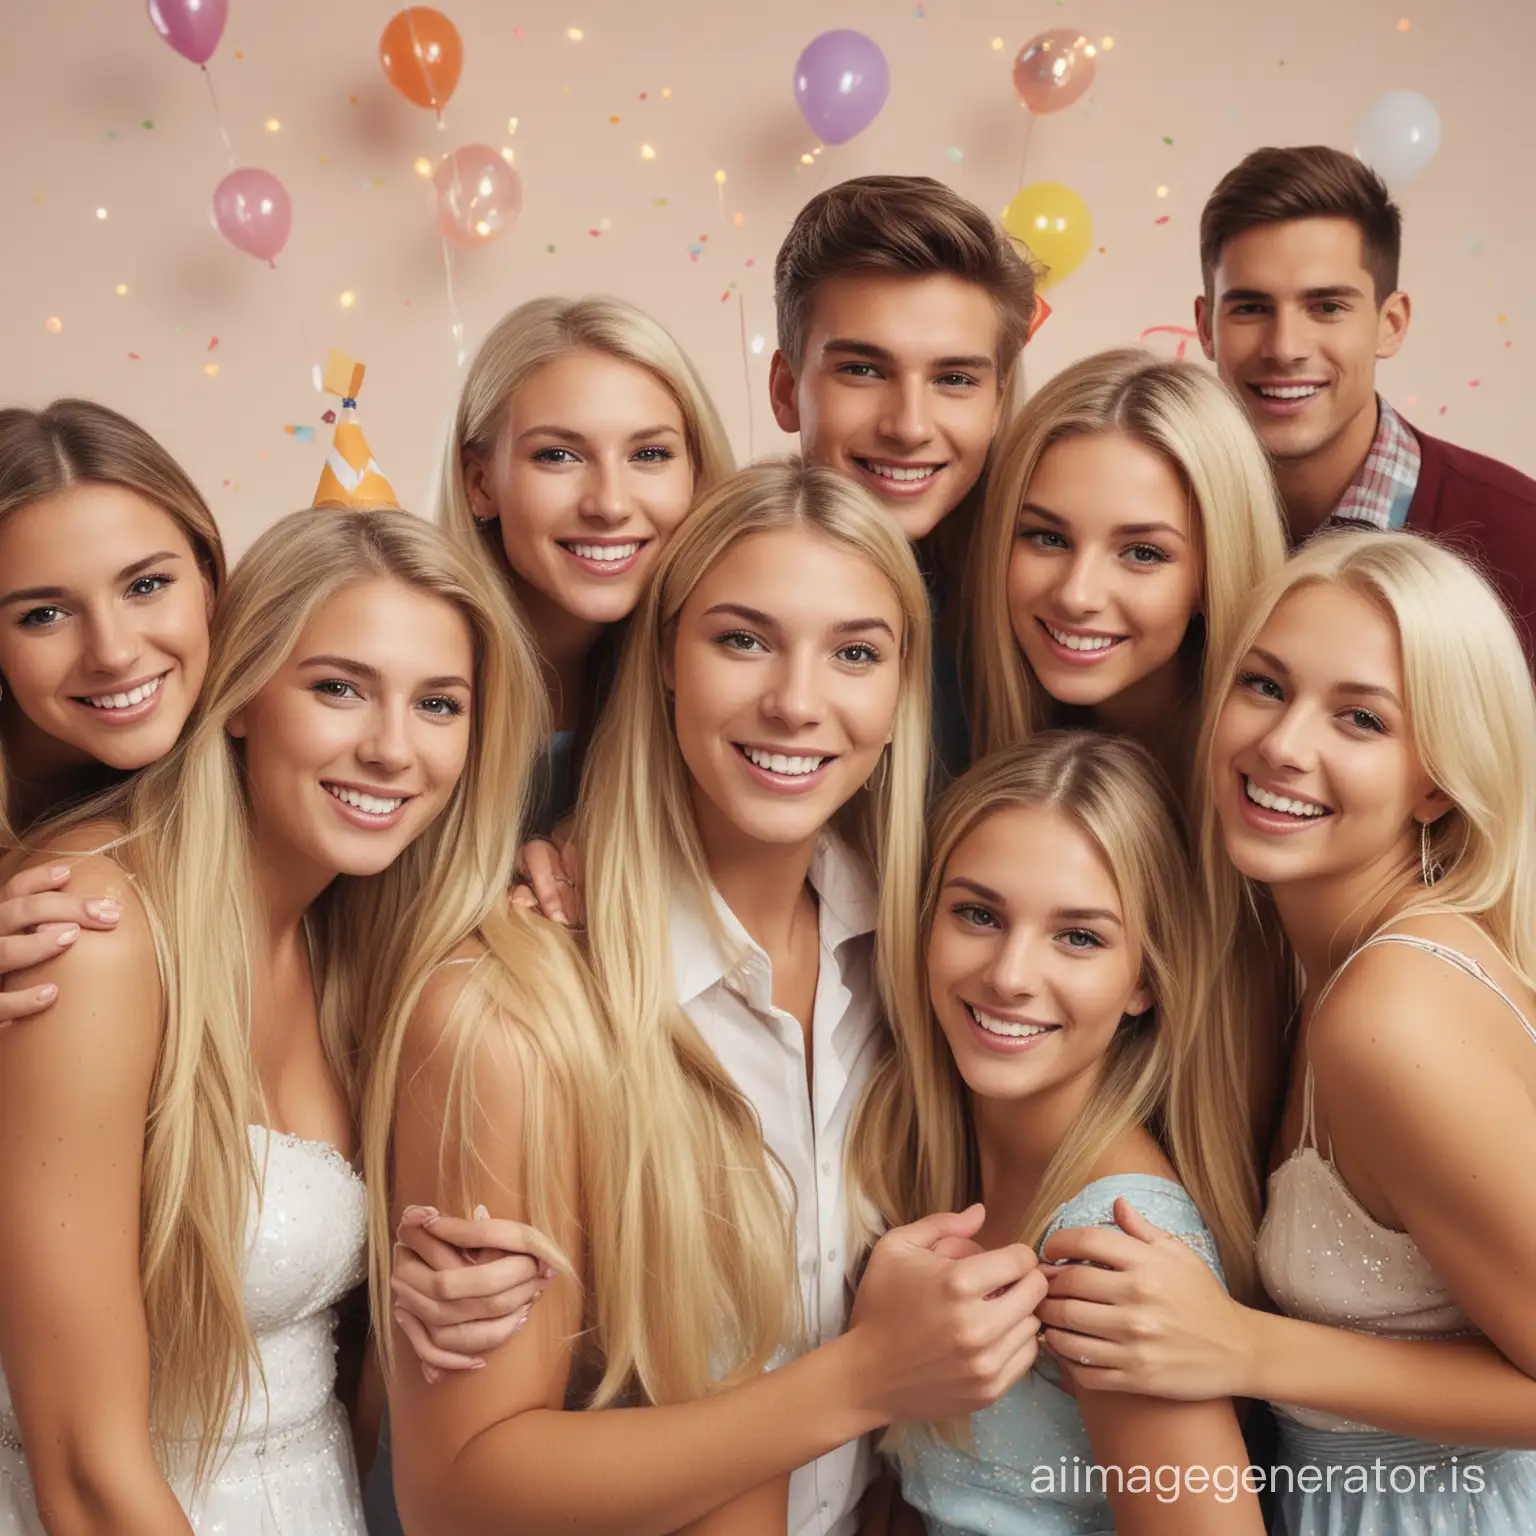 a mentor teacher and his wife with their 5 blonde teenage girlfriends having party background